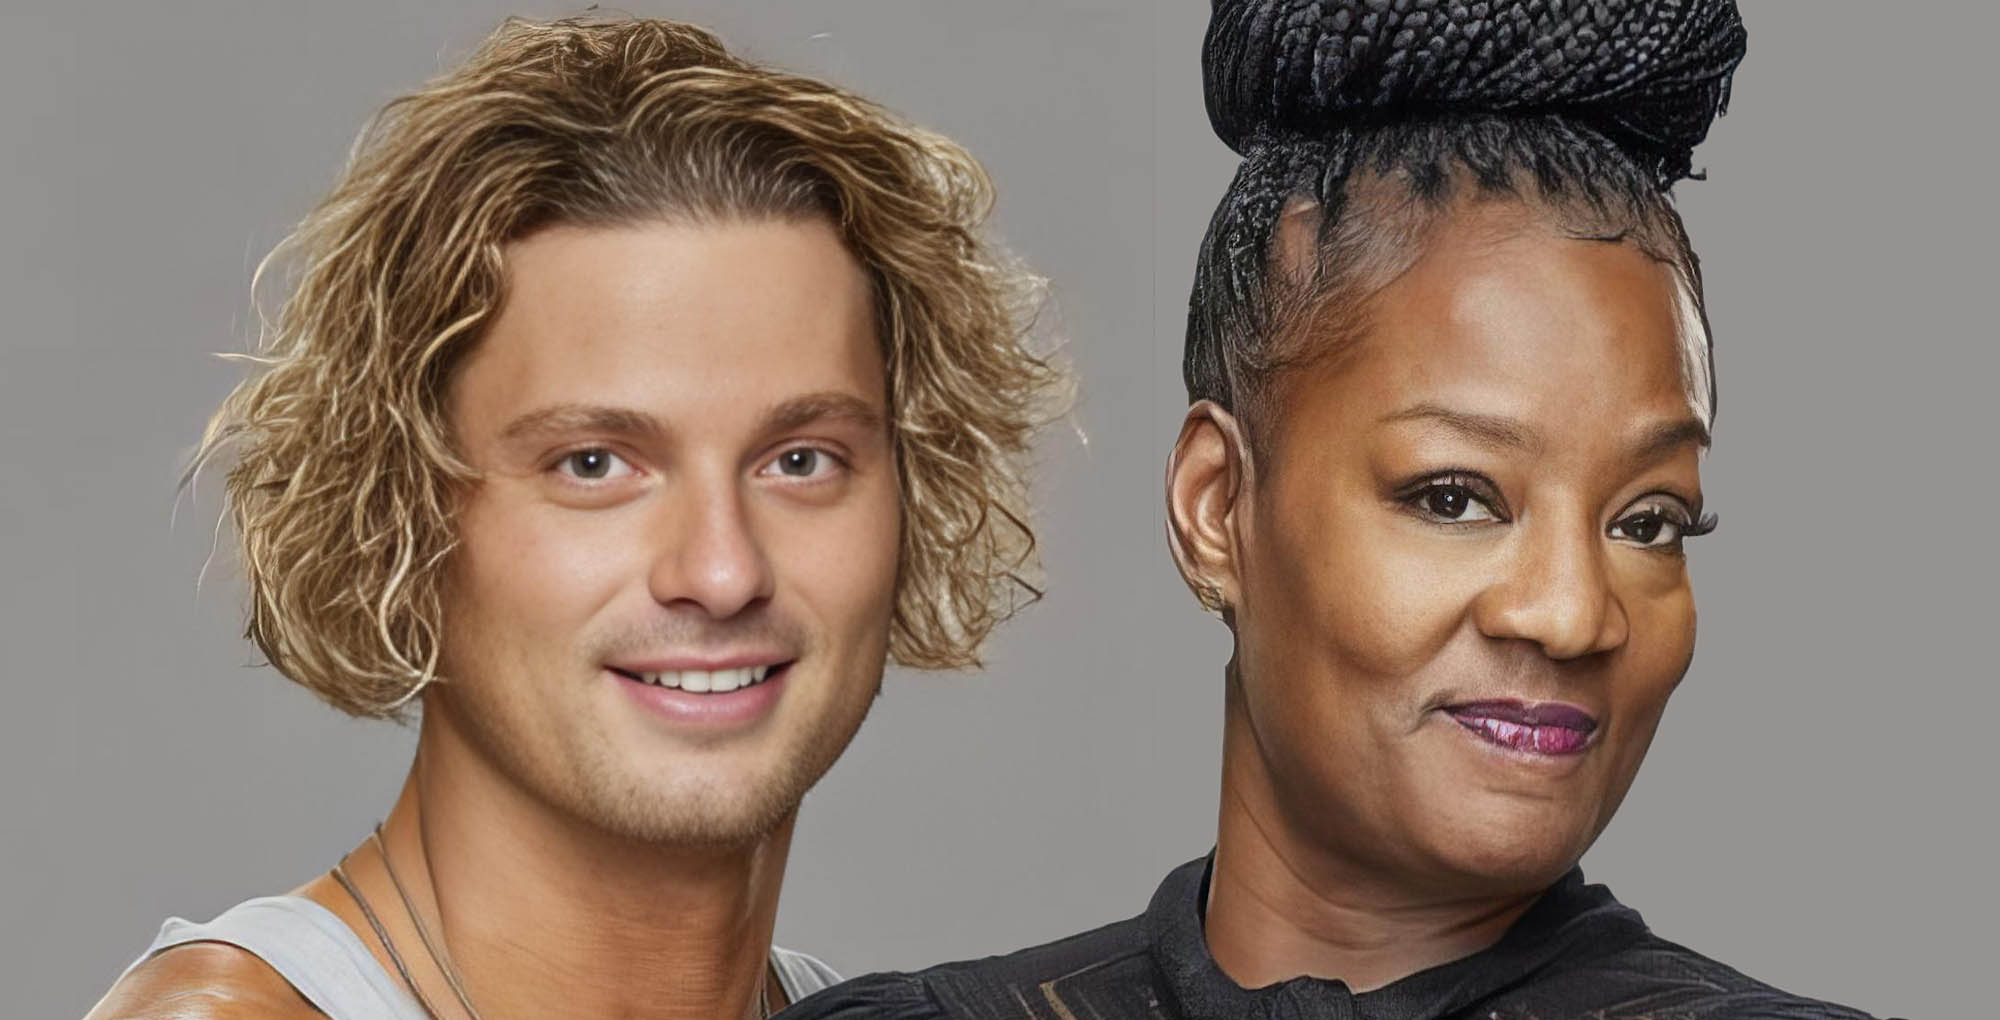 bold and the beautiful comings and goings matt klontz and cirie fields from big brother.